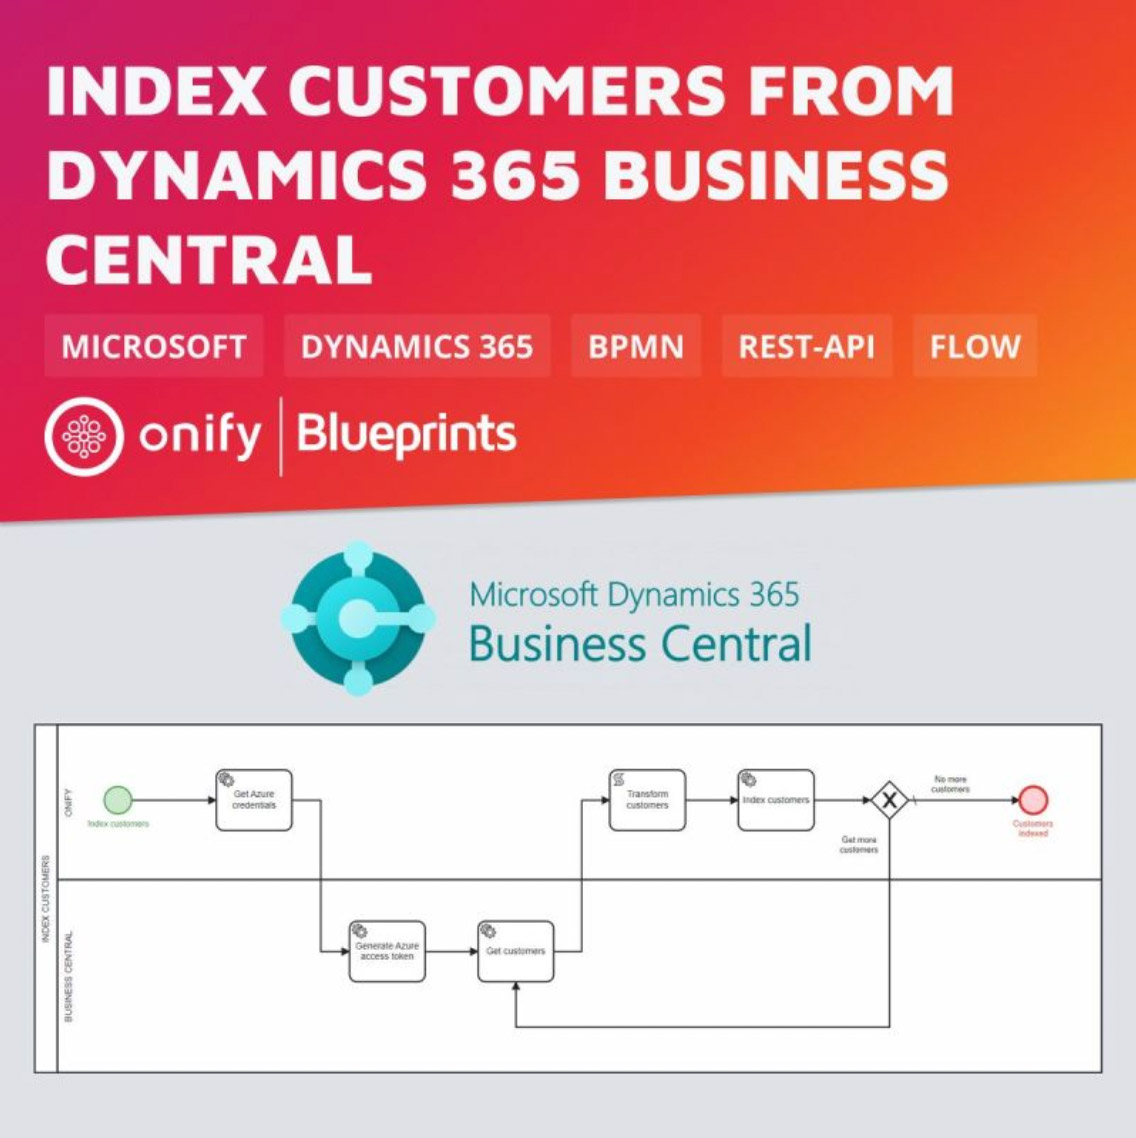 Onify Blueprint - Index customers from Dynamics 365 Business Central